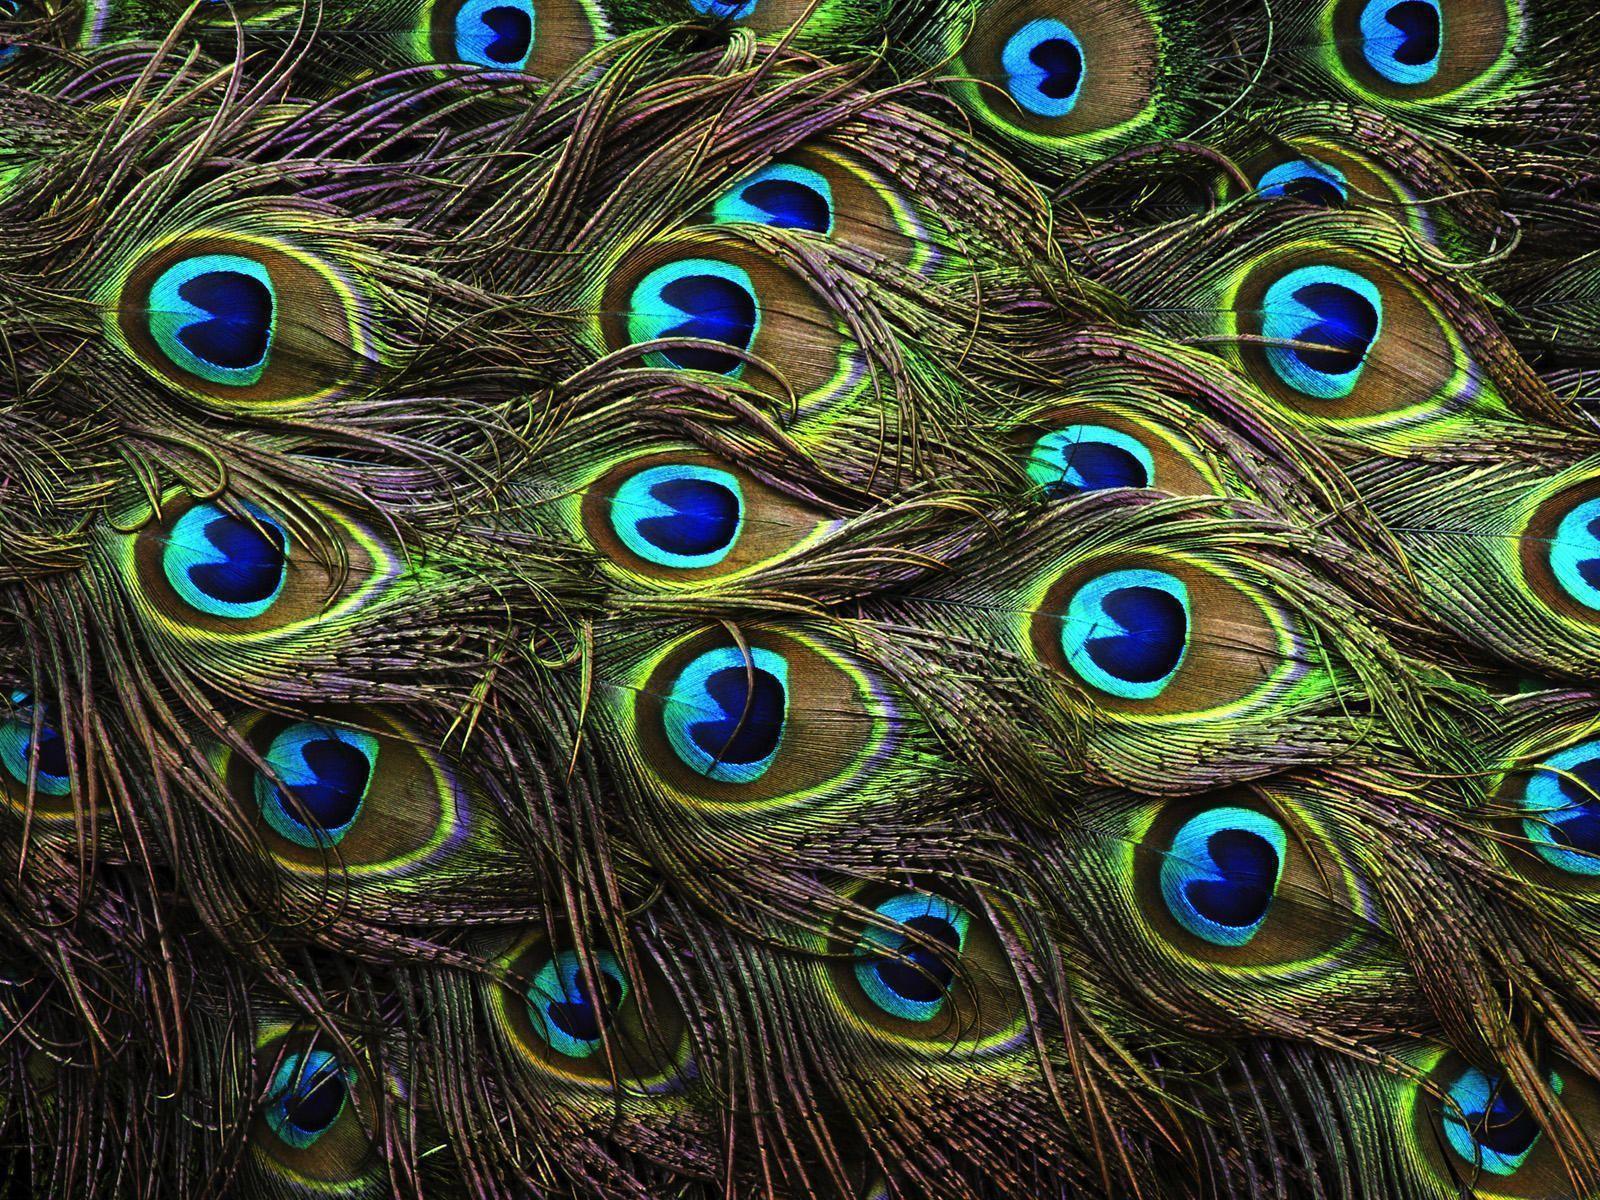 1600x1200 Wallpaper Of Peacock Feathers Hd 2015